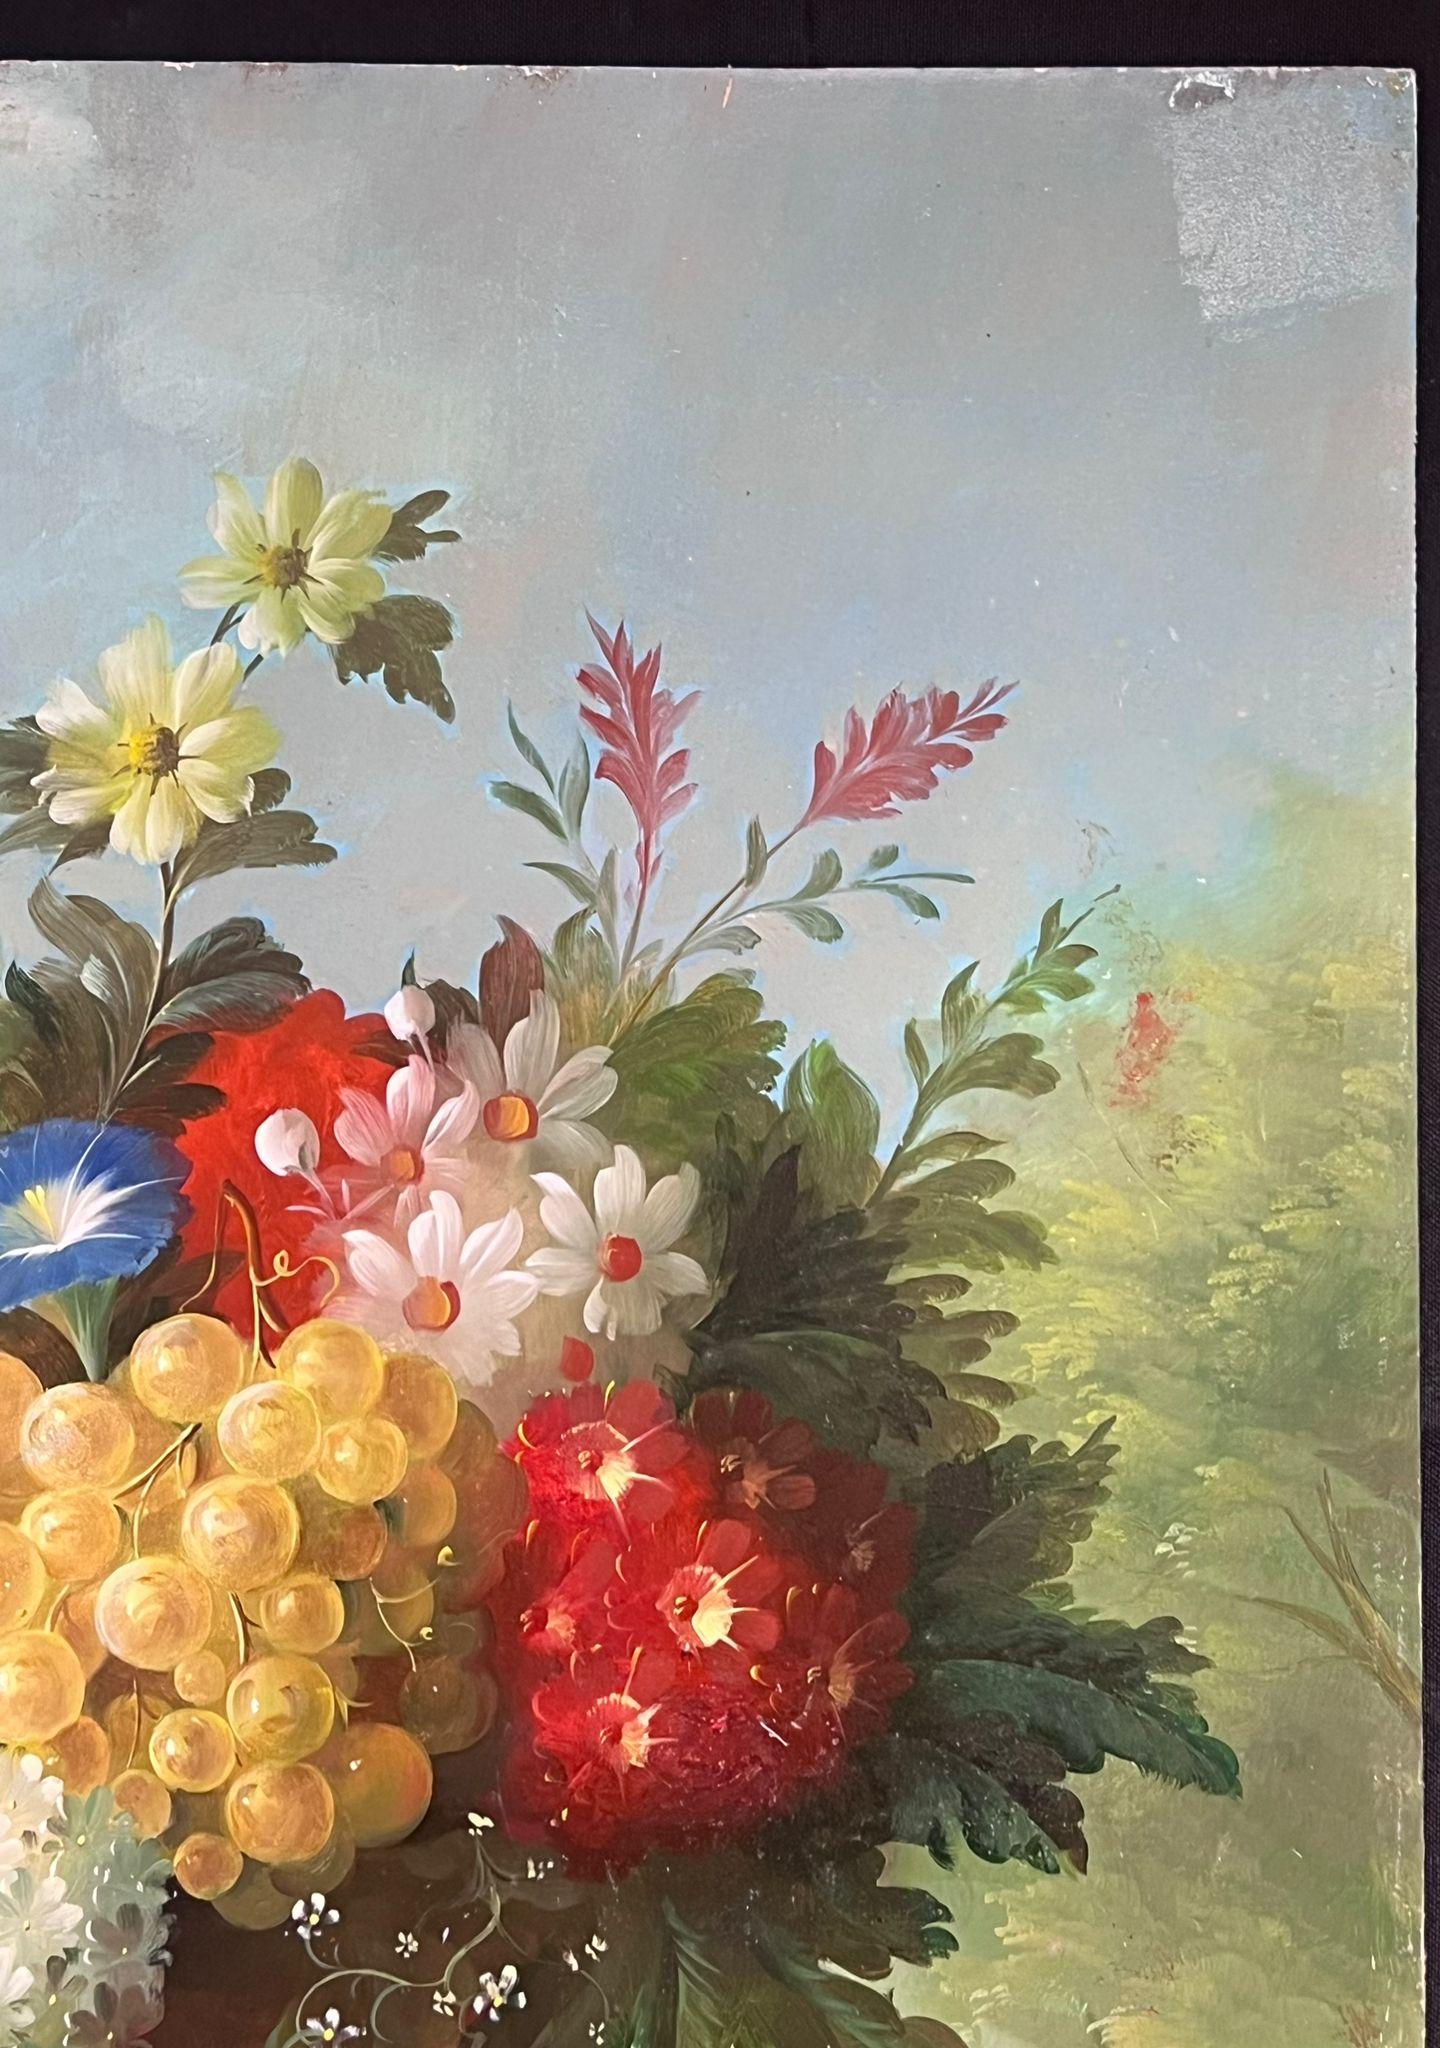 Classical Still Life of Flowers
by Thomas Webster, British contemporary artist
late 20th century
signed oil on board, unframed
board: 30 x 18 inches
provenance: private collection, UK
condition: minor scuffs but overall good and sound condition 